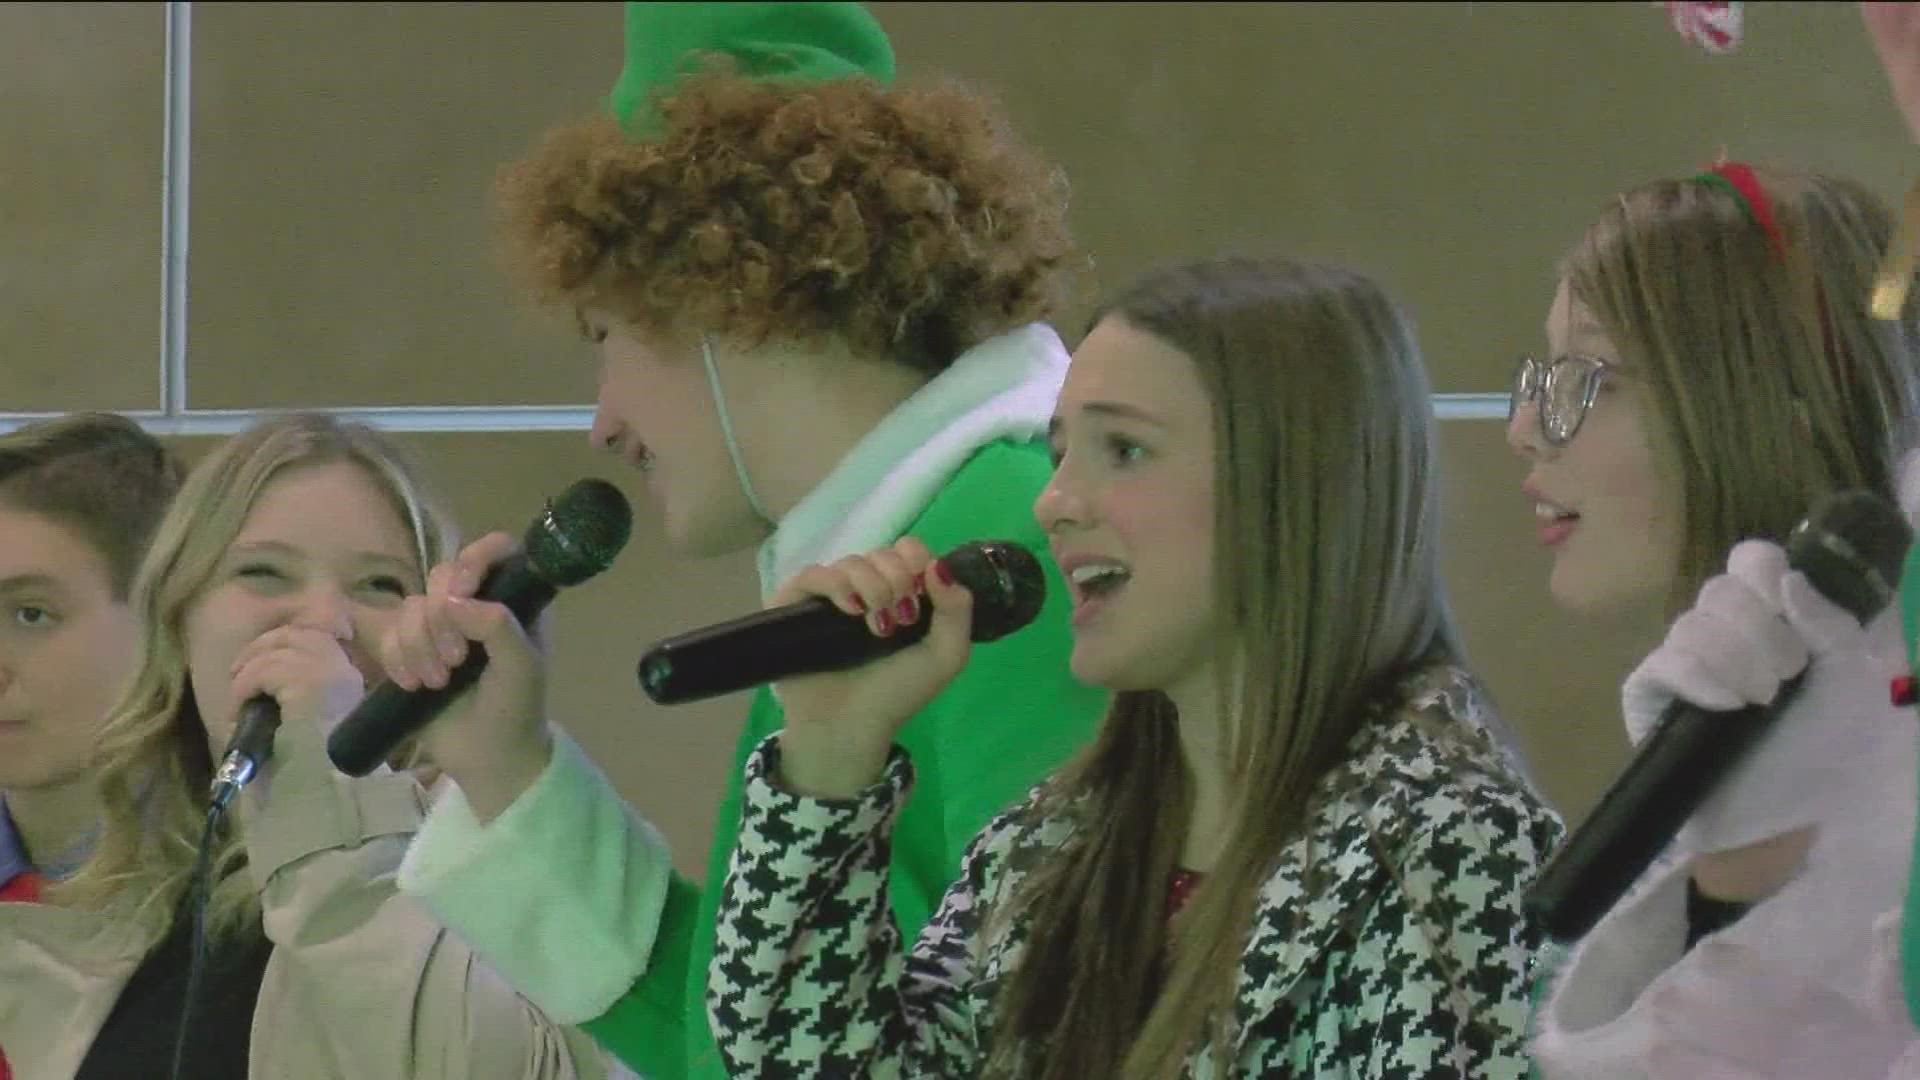 The kids were there to spread the holiday spirit to shoppers as well as raise awareness for the theater and its production of Elf Jr. the Musical.